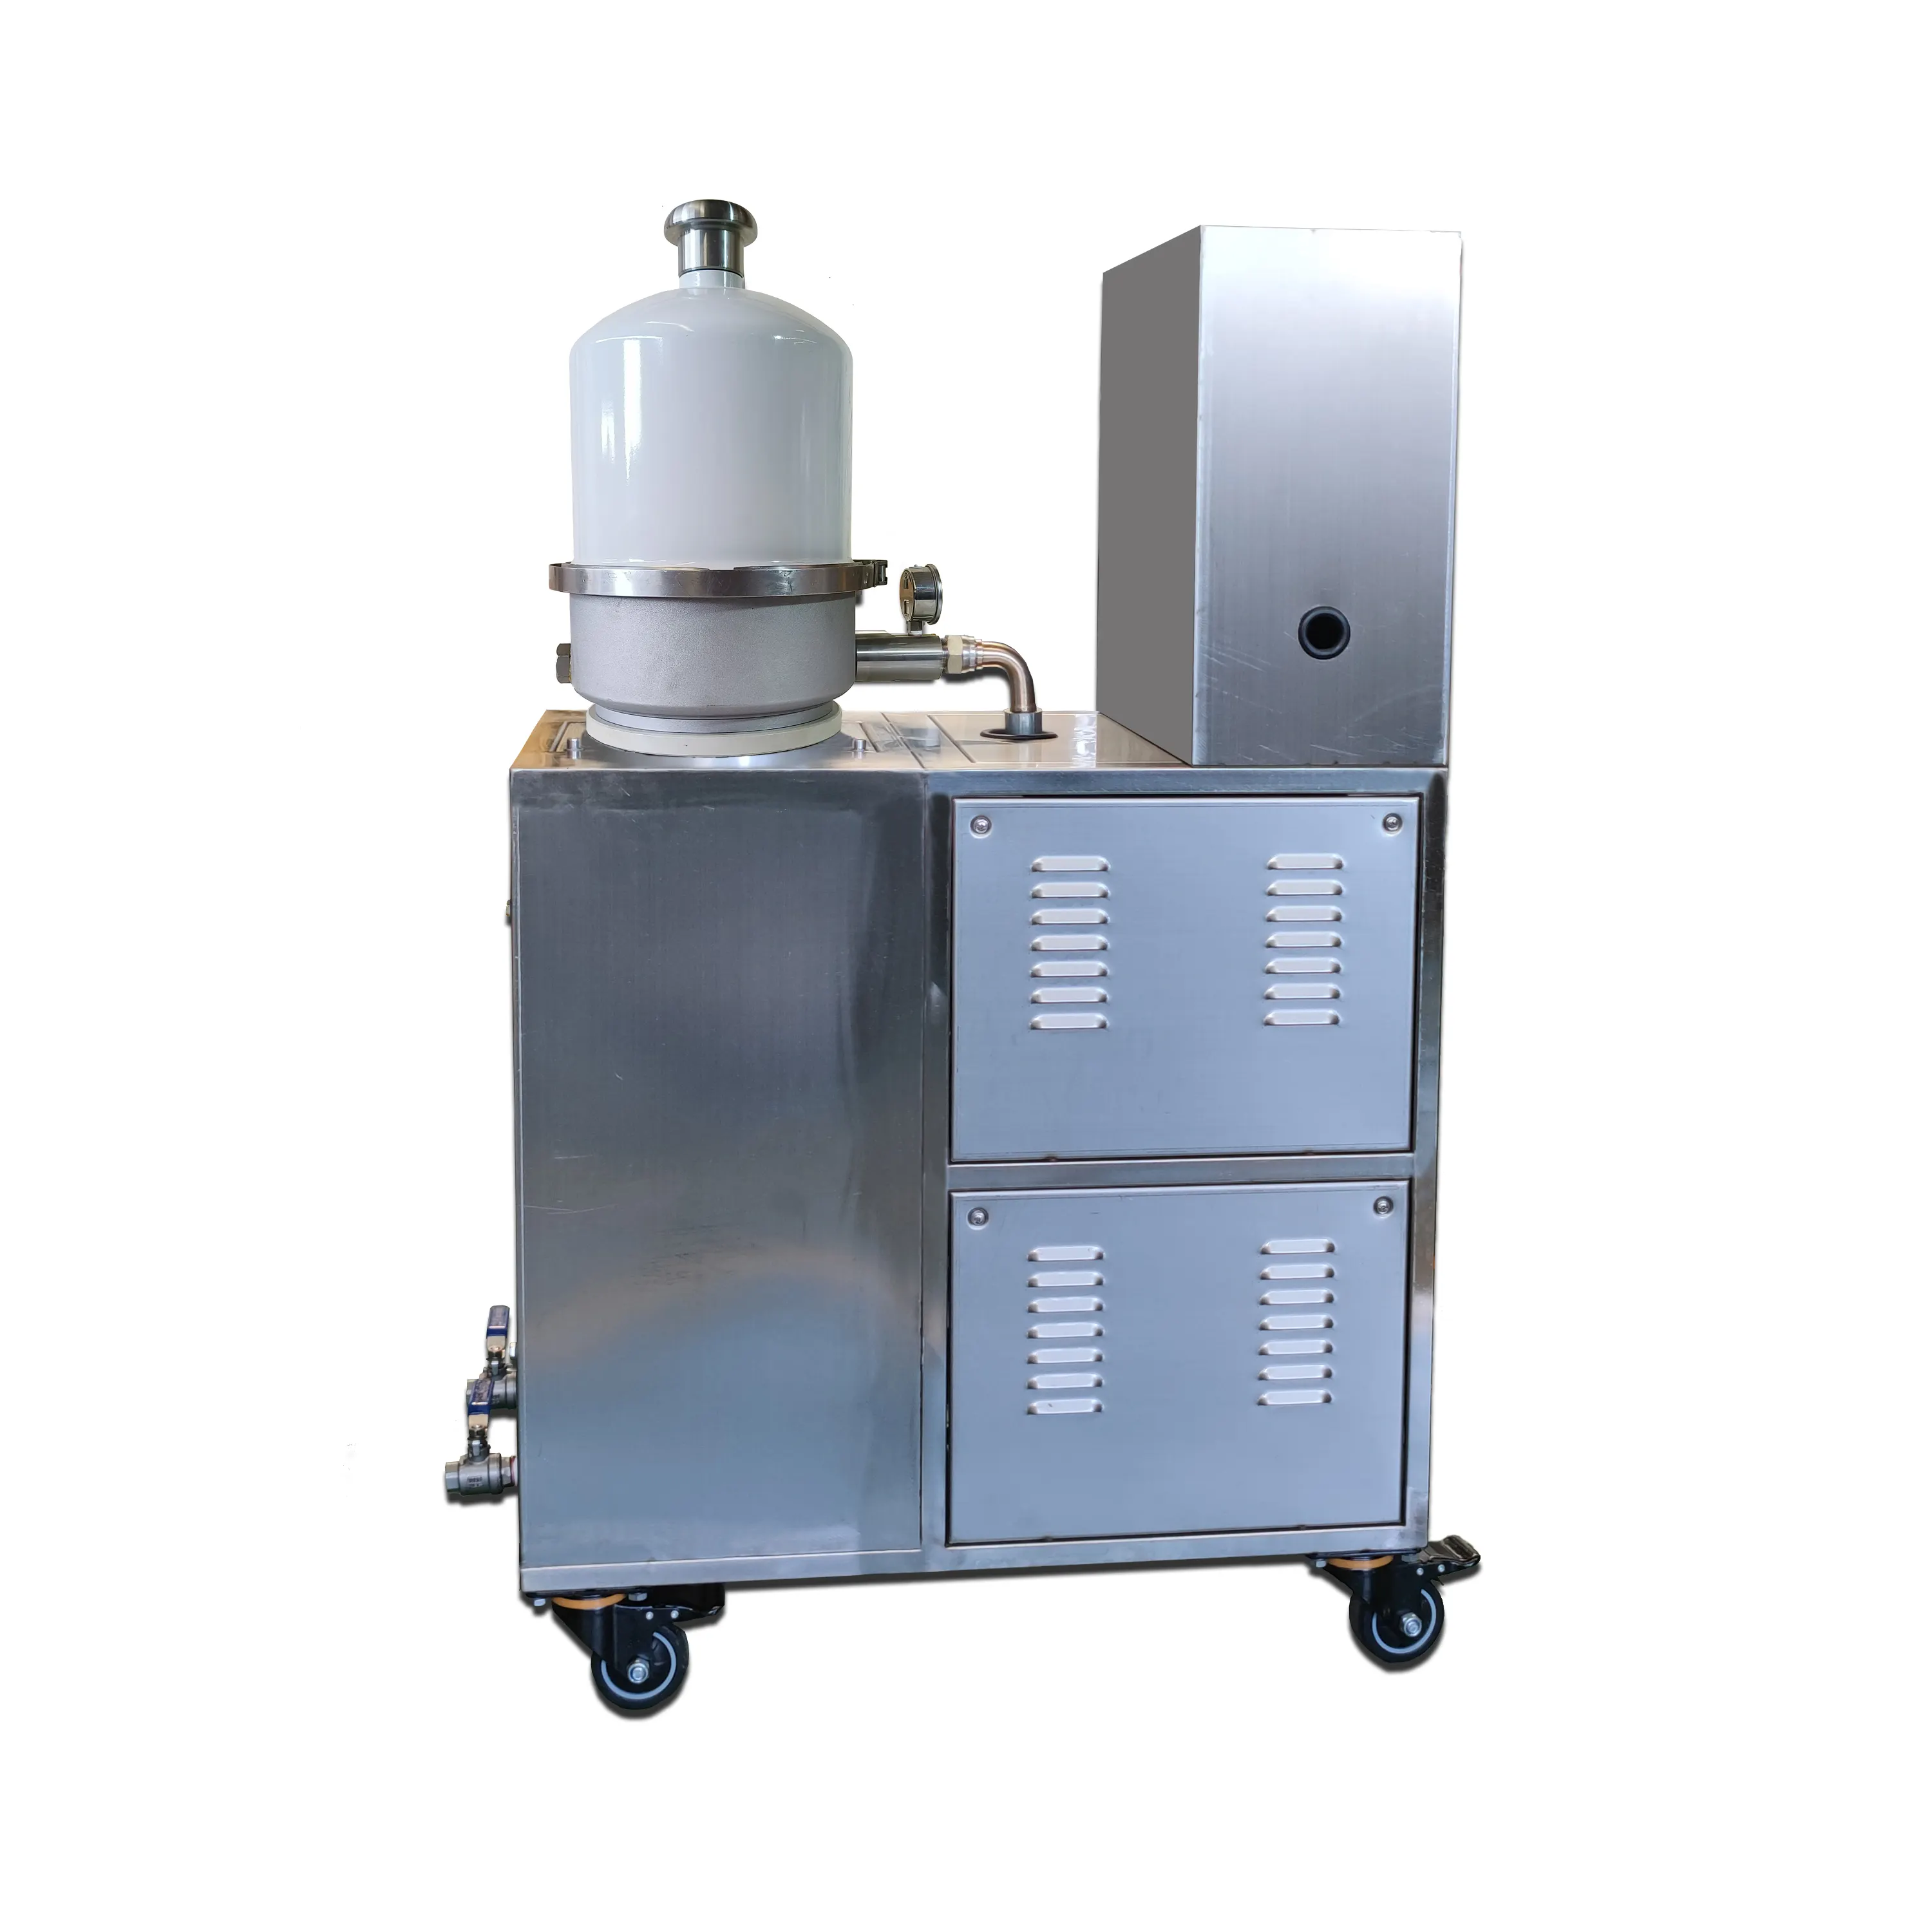 Oil purification machine for the lubricants